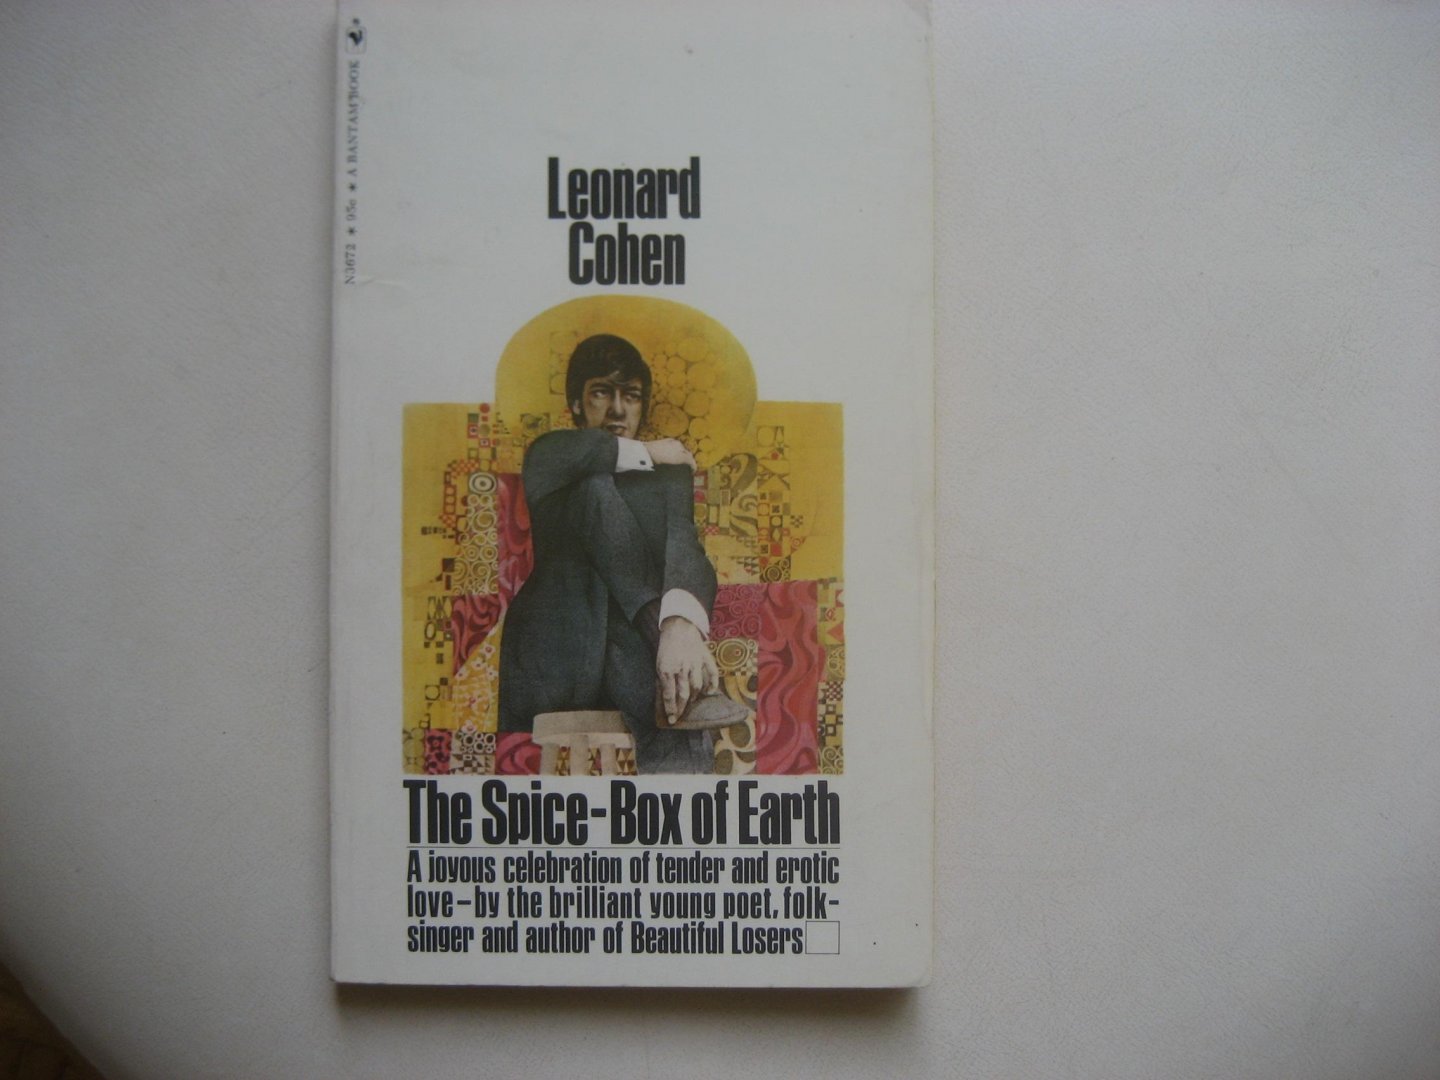 Leonard Cohen - The Spice-Box of Earth / Gedichten / A joyous celebration of tender and erotic love